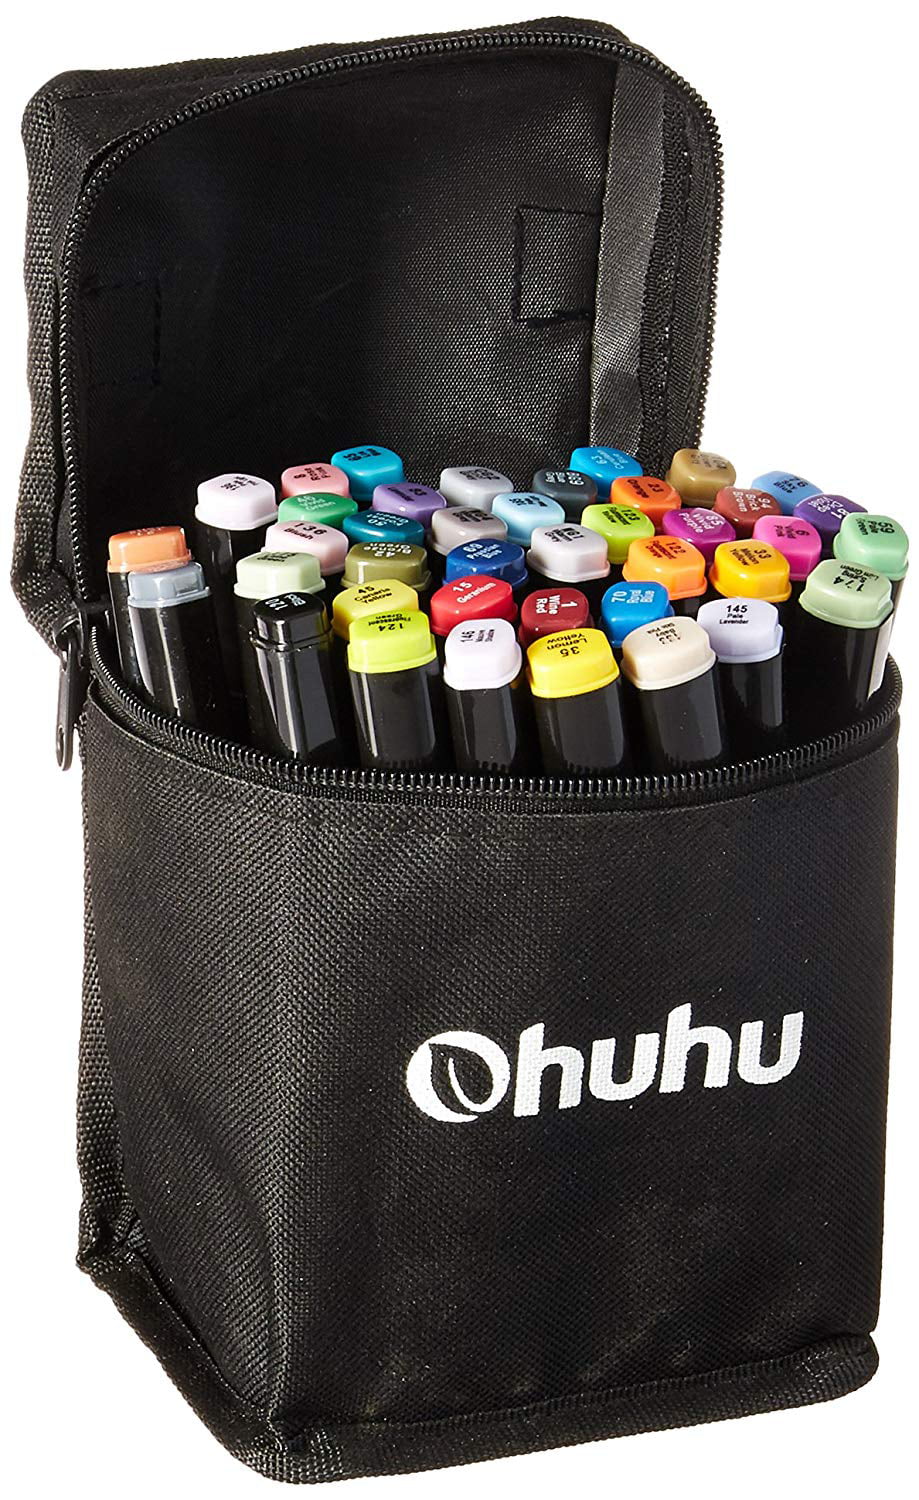 Ohuhu Markers: Dry and Under-weight Markers in a New Set? — Marker